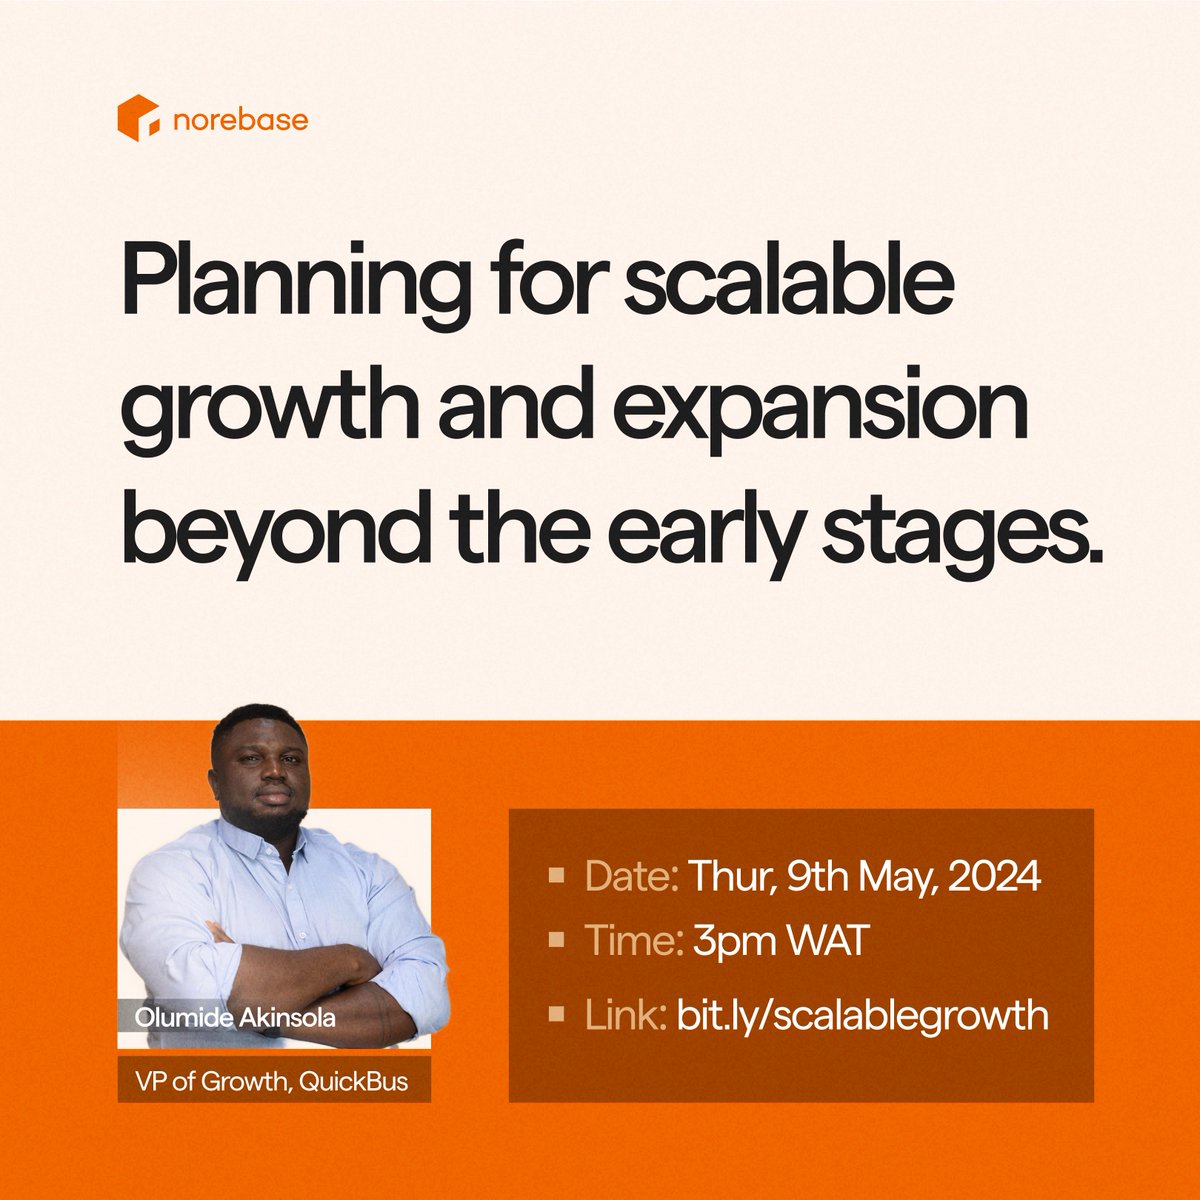 Olumide Akinsola (@gboukzi) is the Co-Founder and VP of Growth at QuickBus (recently acquired by BuuPass).

He is a Growth Operator with over a decade of experience helping businesses scale.

He will be sharing some of his strategies for this  on the 9th of May, 2024 by 3pm WAT.